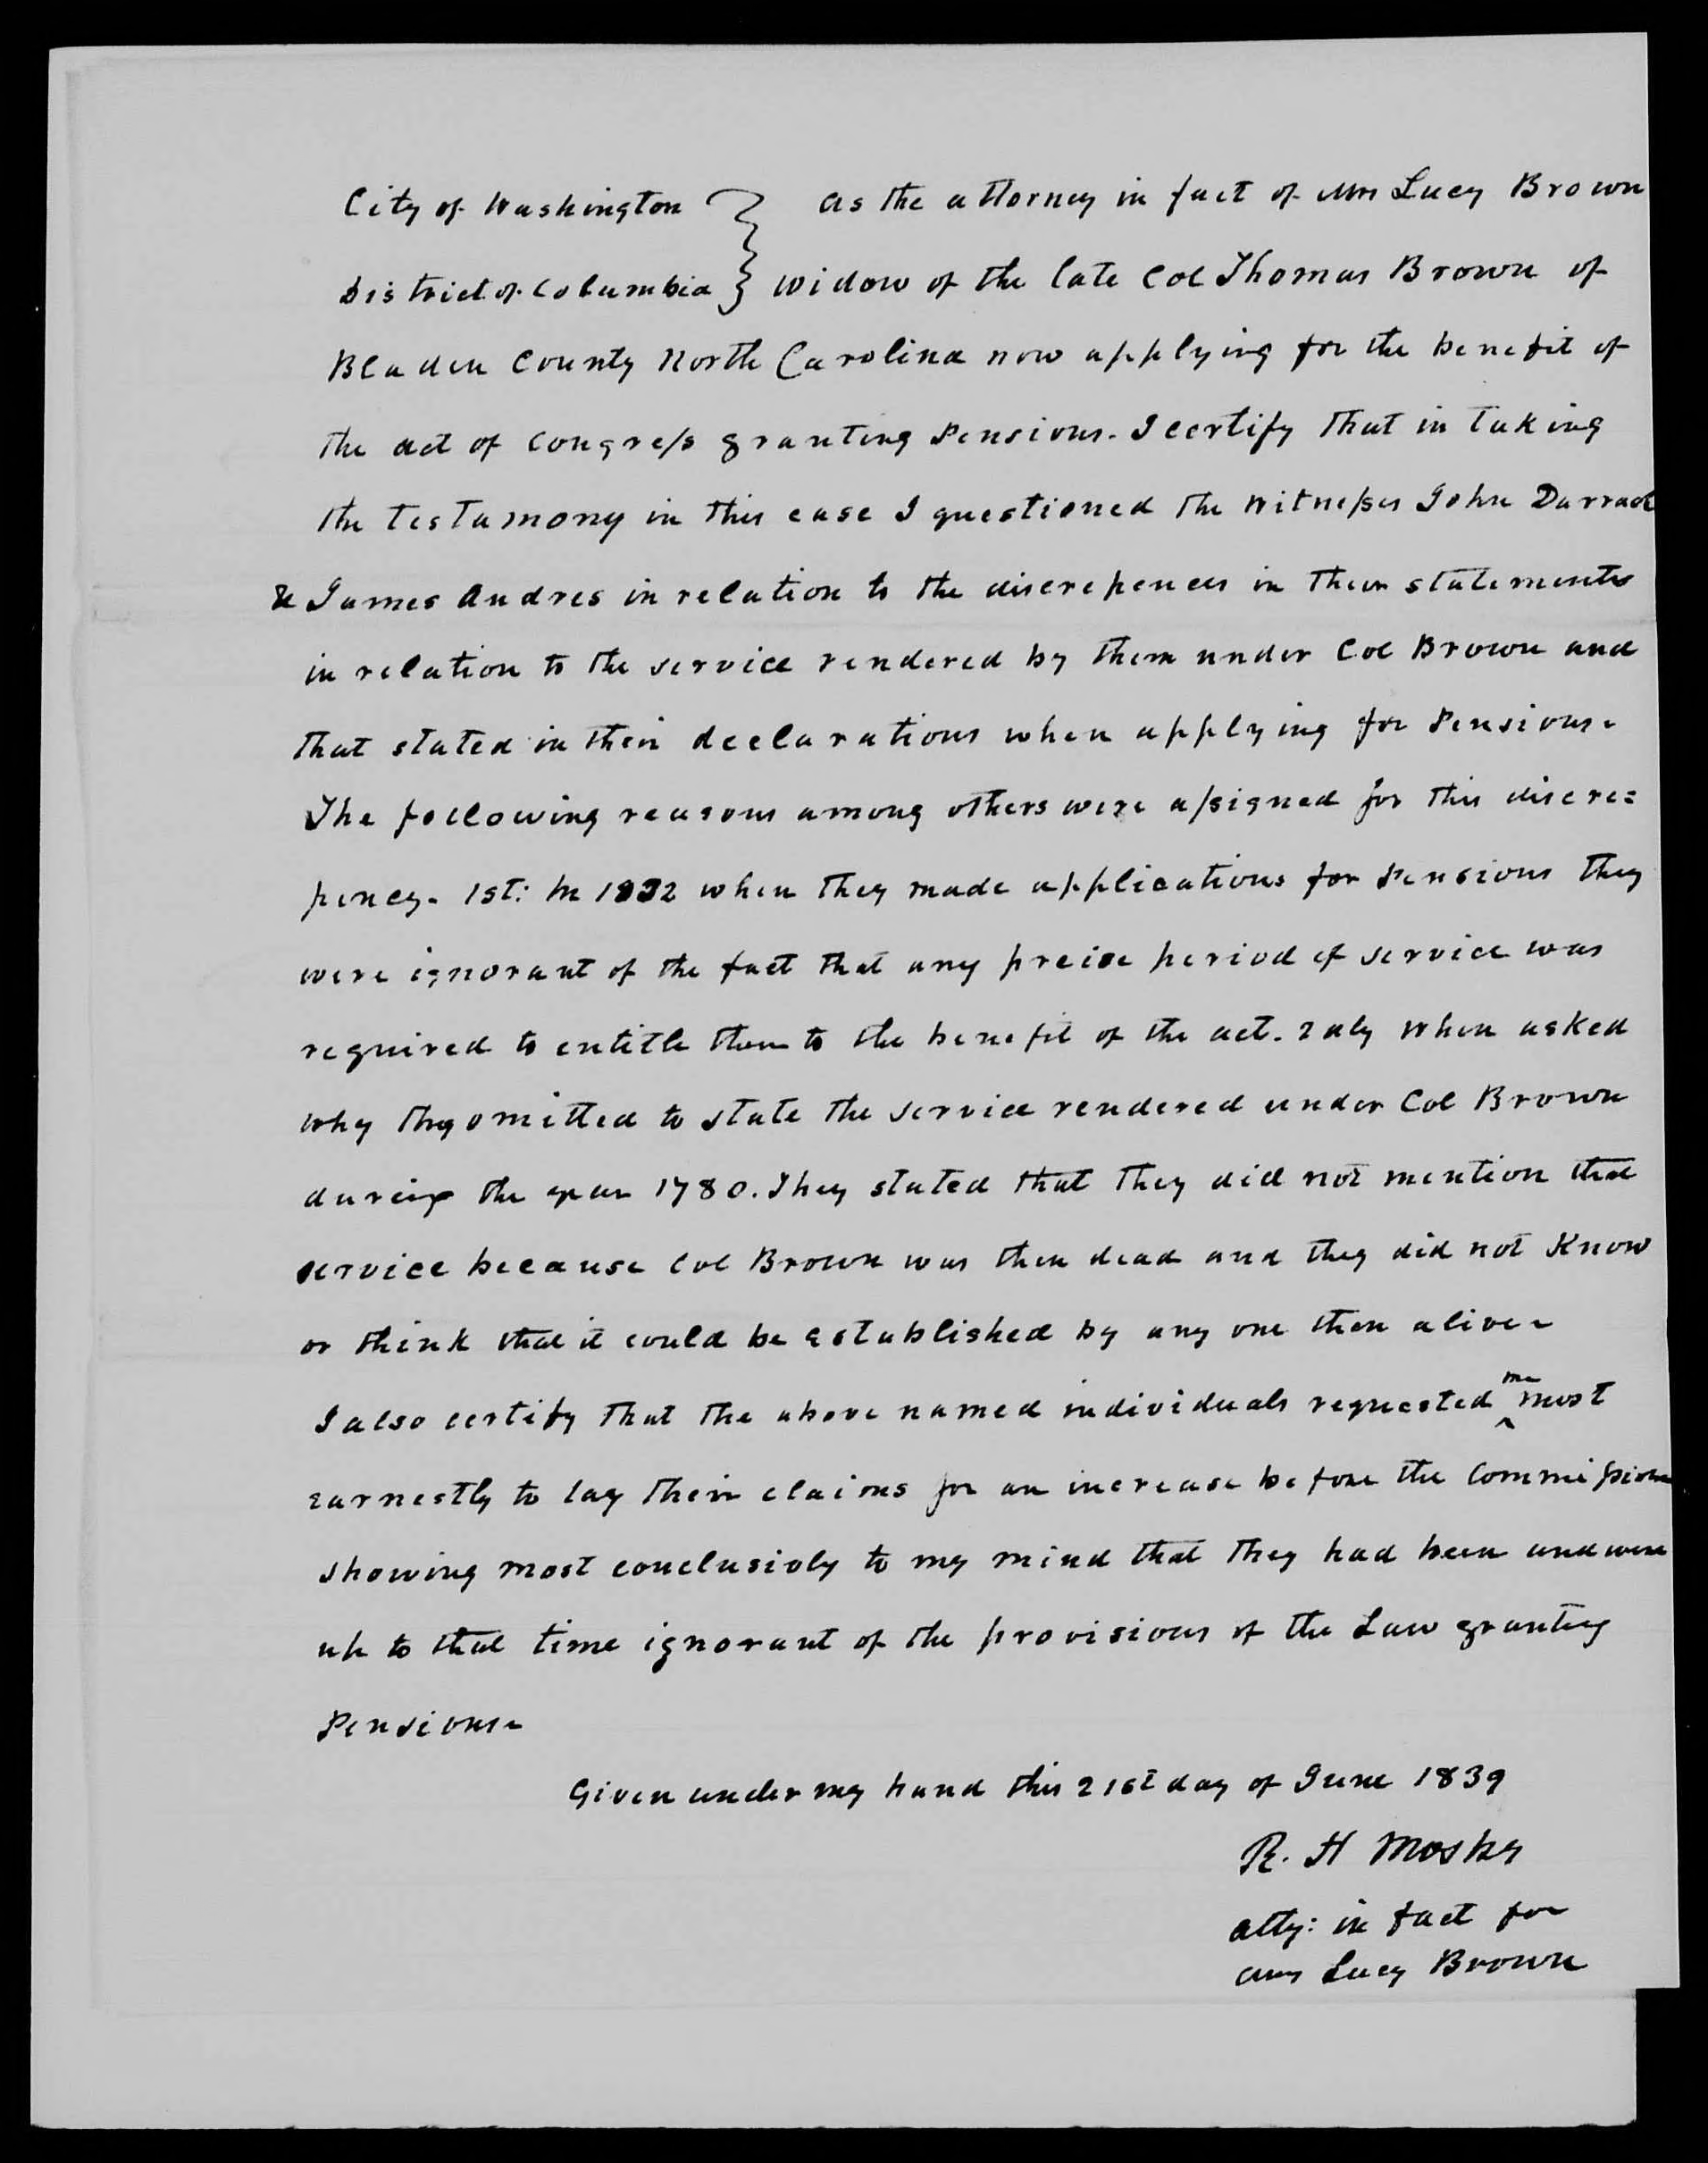 Affidavit of R. H. Mosby in support of a Pension Claim for Lucy Brown, 21 June 1839, page 1